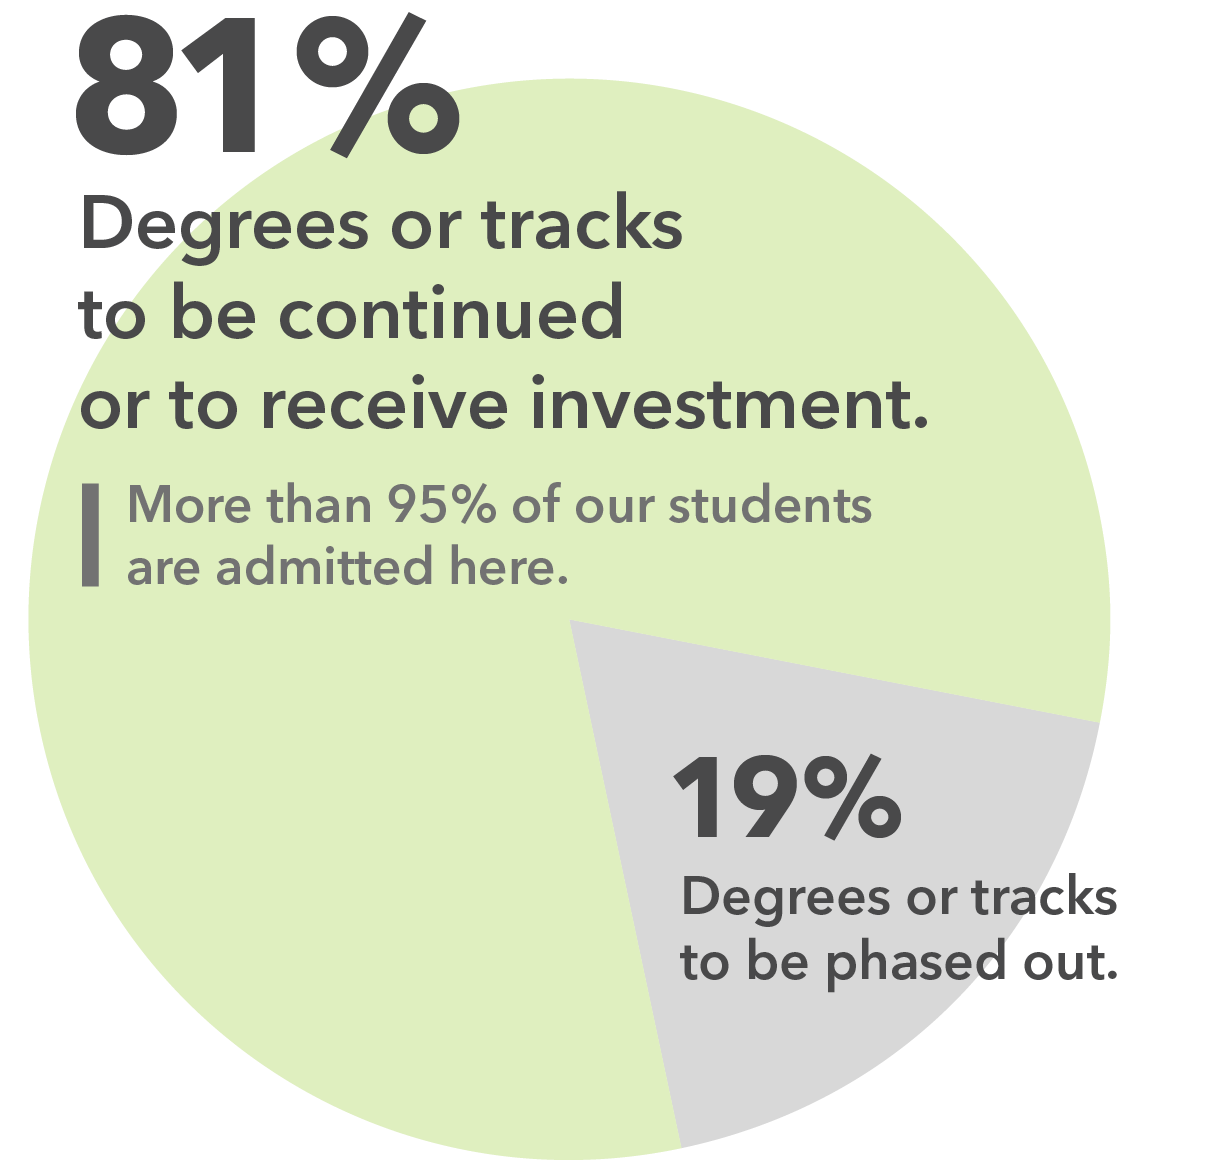 Pie chart showing that 81 percent of UA's degrees or tracks will continue or receive increased investment.